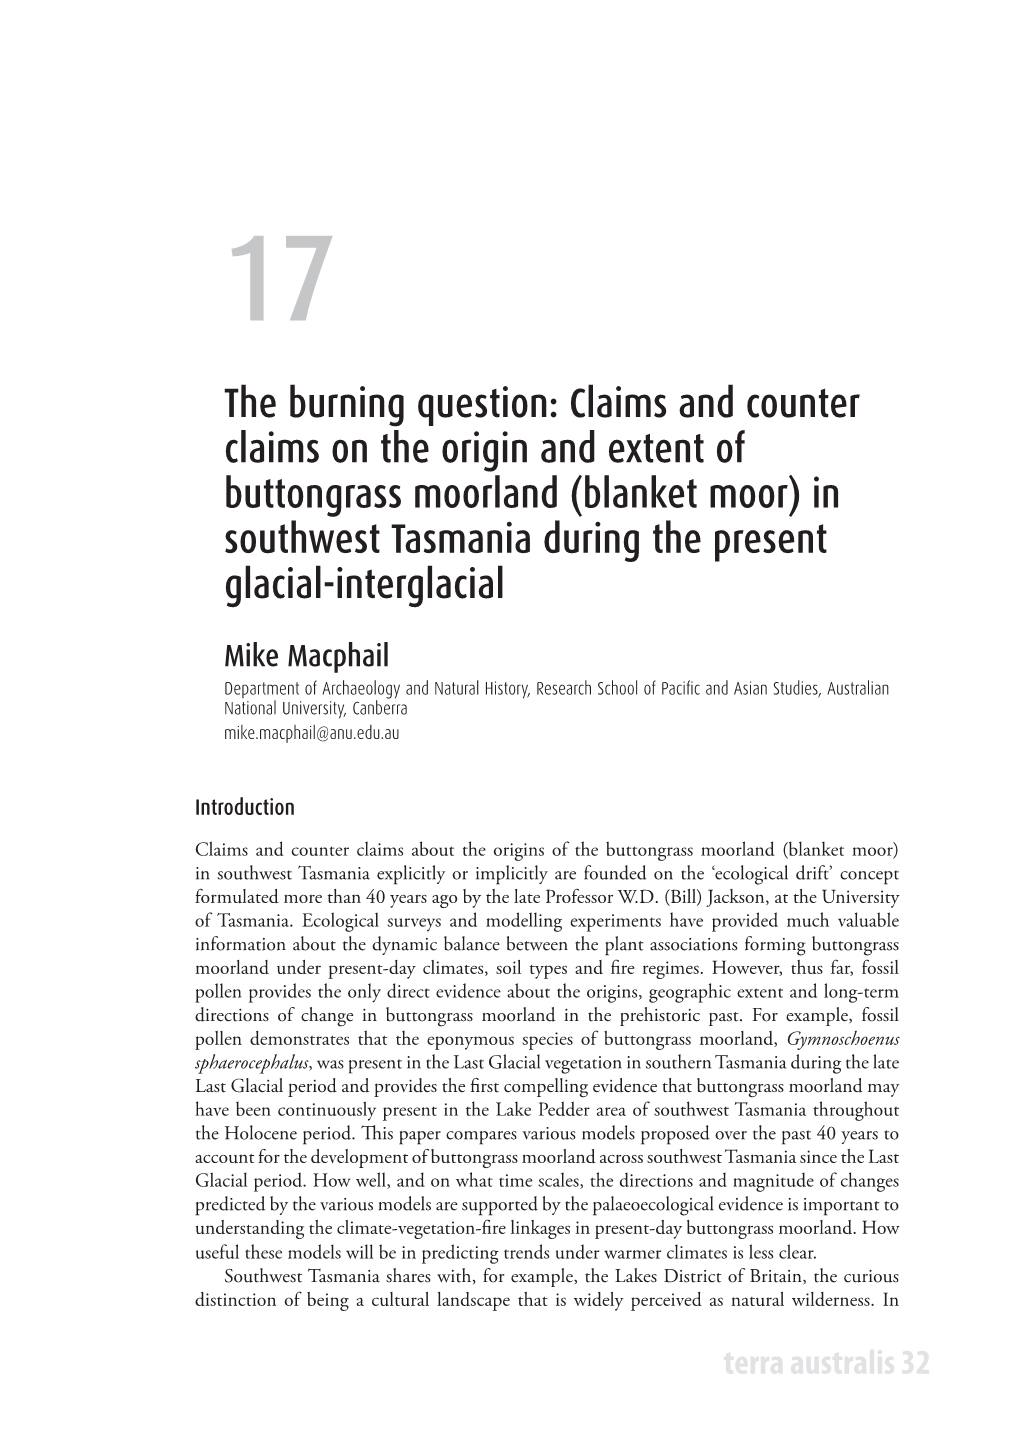 The Burning Question: Claims and Counter Claims on The